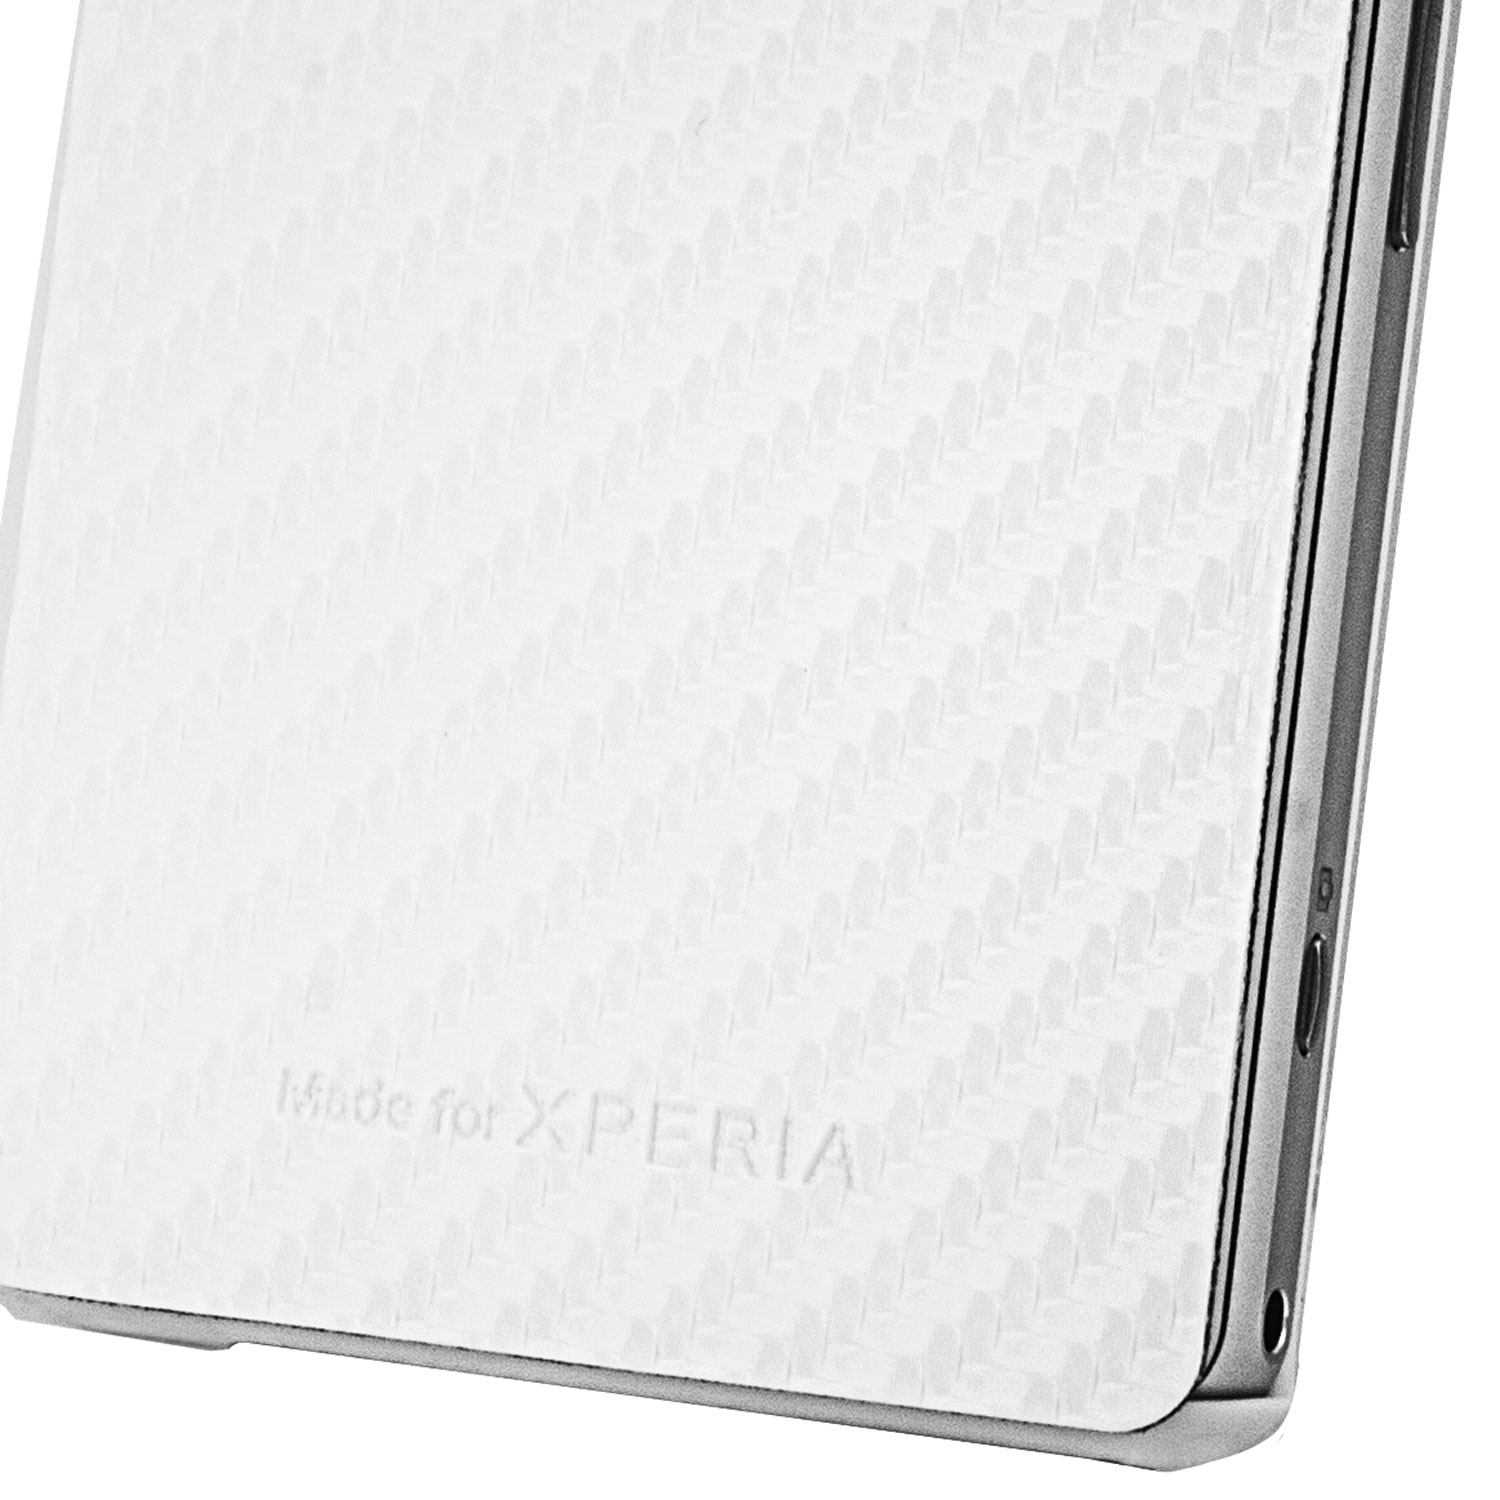 Roxfit Book Flip Case for Sony Xperia Z1 Compact - Carbon White